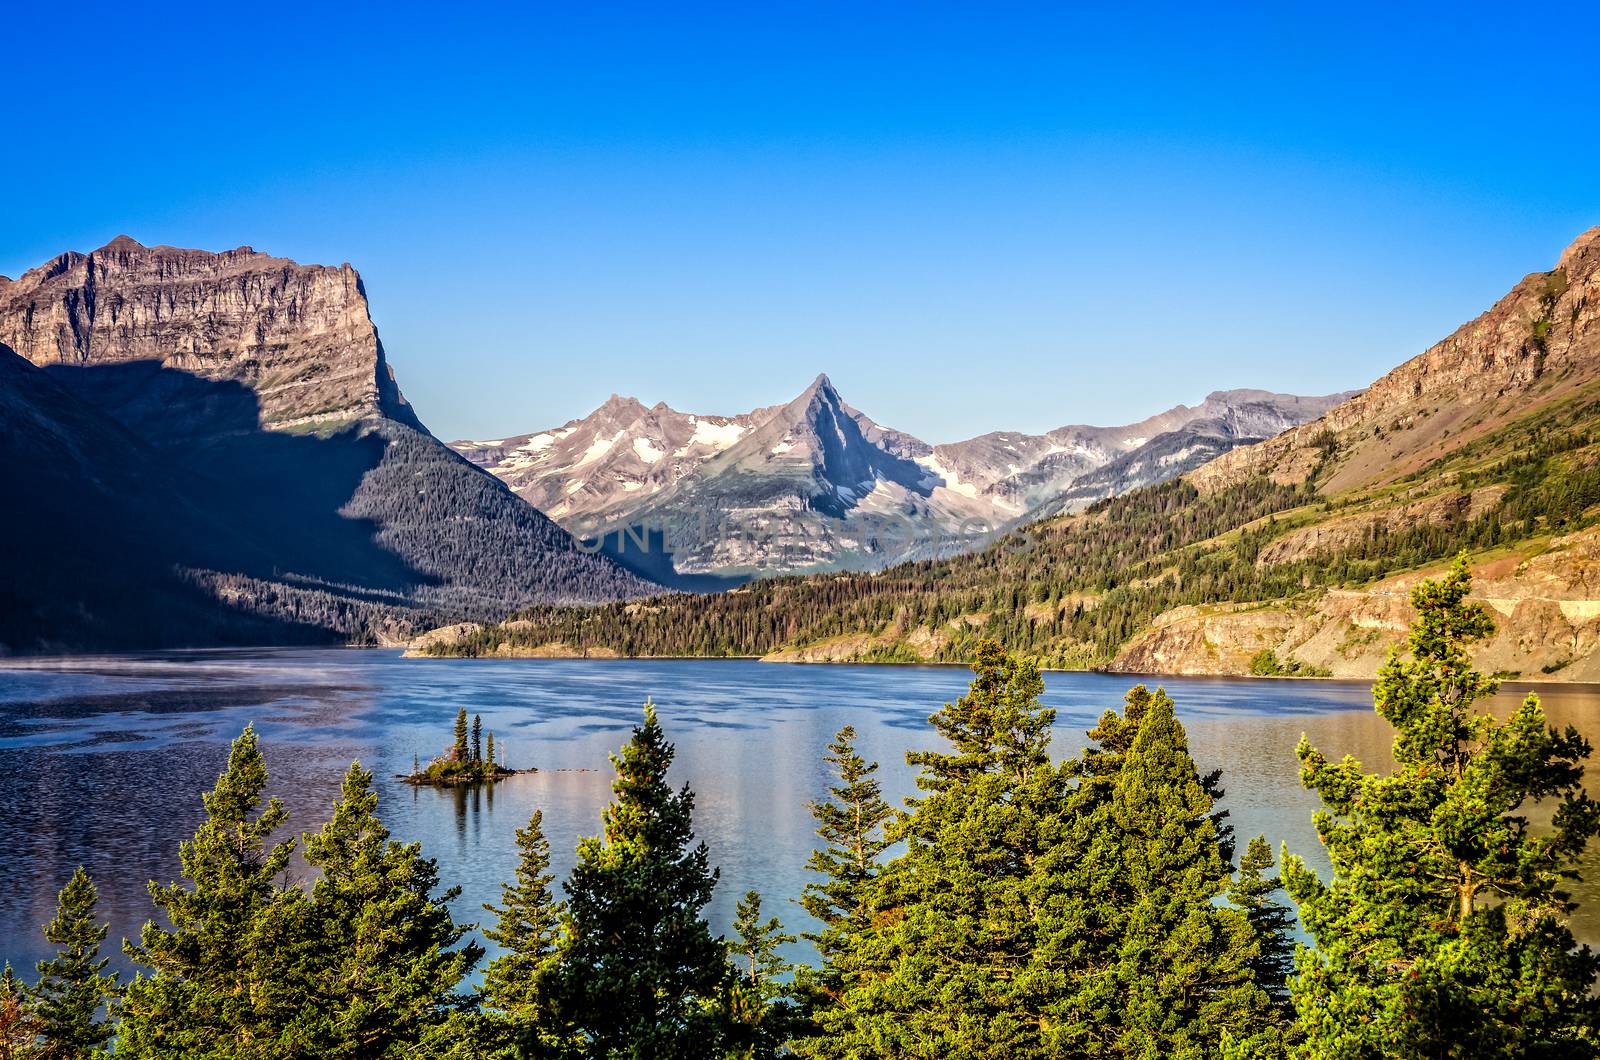 Landscape view of lake and mountain range in Glacier NP, Montana, USA